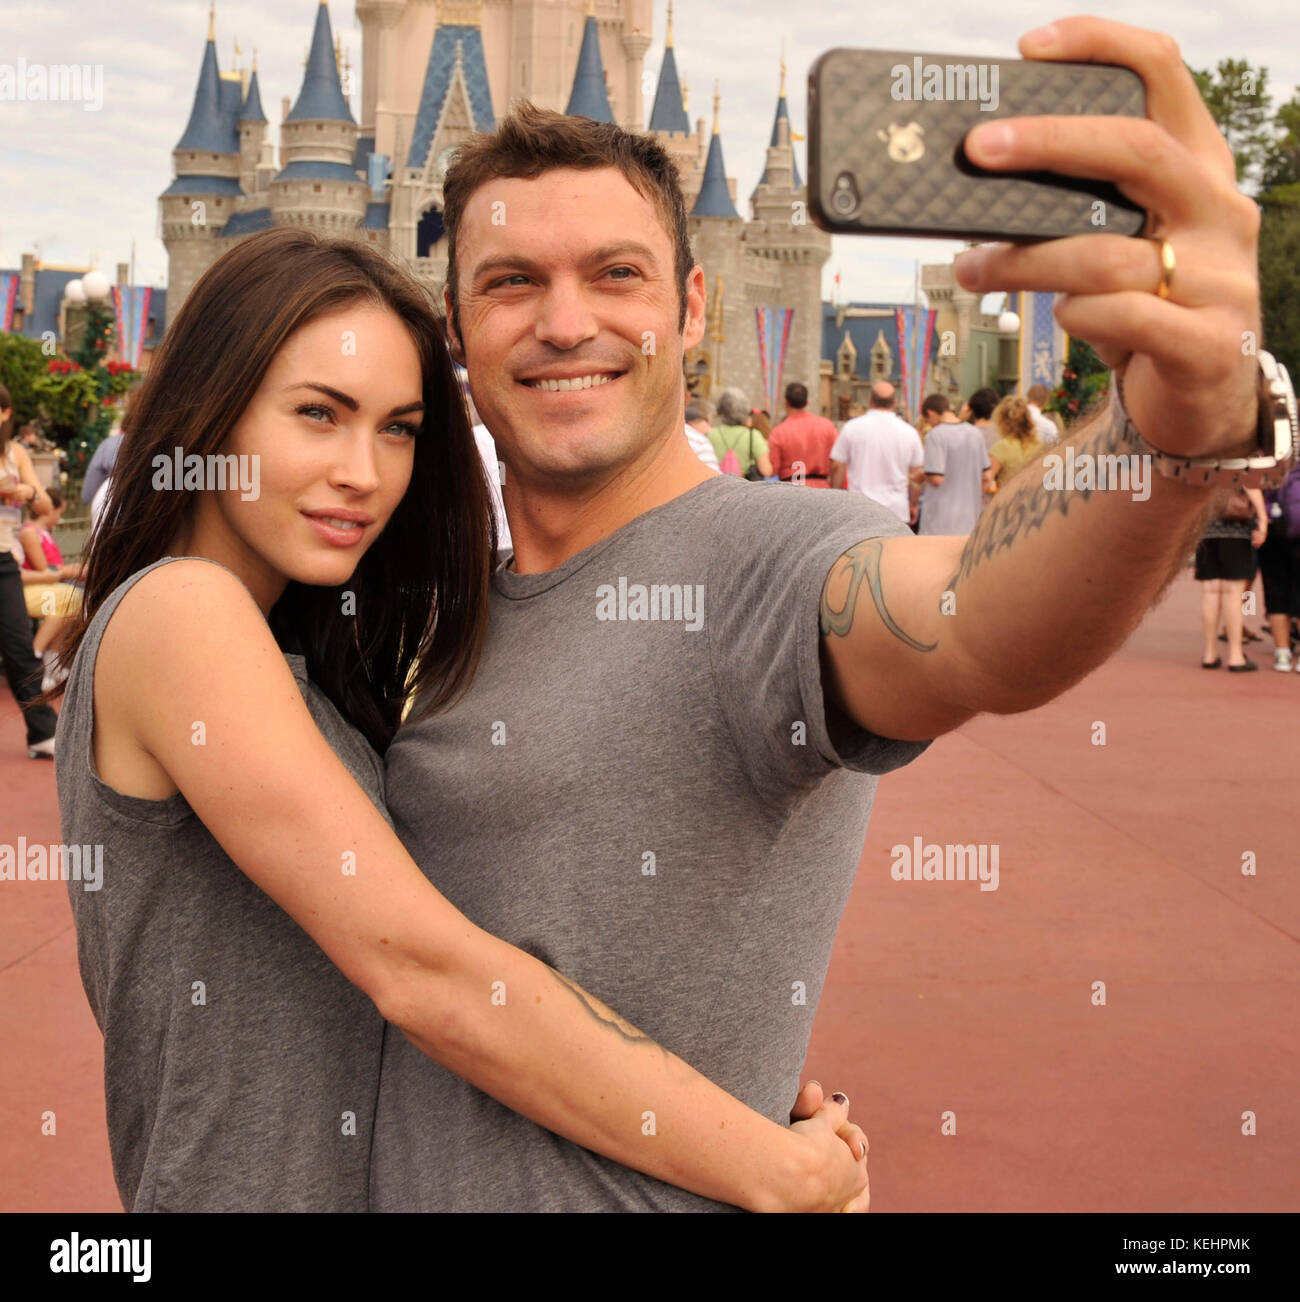 (Nov. 26, 2010):  Actor Brian Austin Green (right) and his wife, actress/model Megan Fox (left), take a souvenir photo Nov. 26, 2010 in the Magic Kingdom in Lake Buena Vista, Fla.  Green ('Beverly Hills, 90210', 'Desperate Housewives') and Fox ('Transformers,' 'Transformers: Revenge of the Fallen') were married in June 2010 in Hawaii.    People:  Megan Fox Brian Austin Green  Transmission Ref:  MNC   Credit: Hoo-me.com/MediaPunch Stock Photo